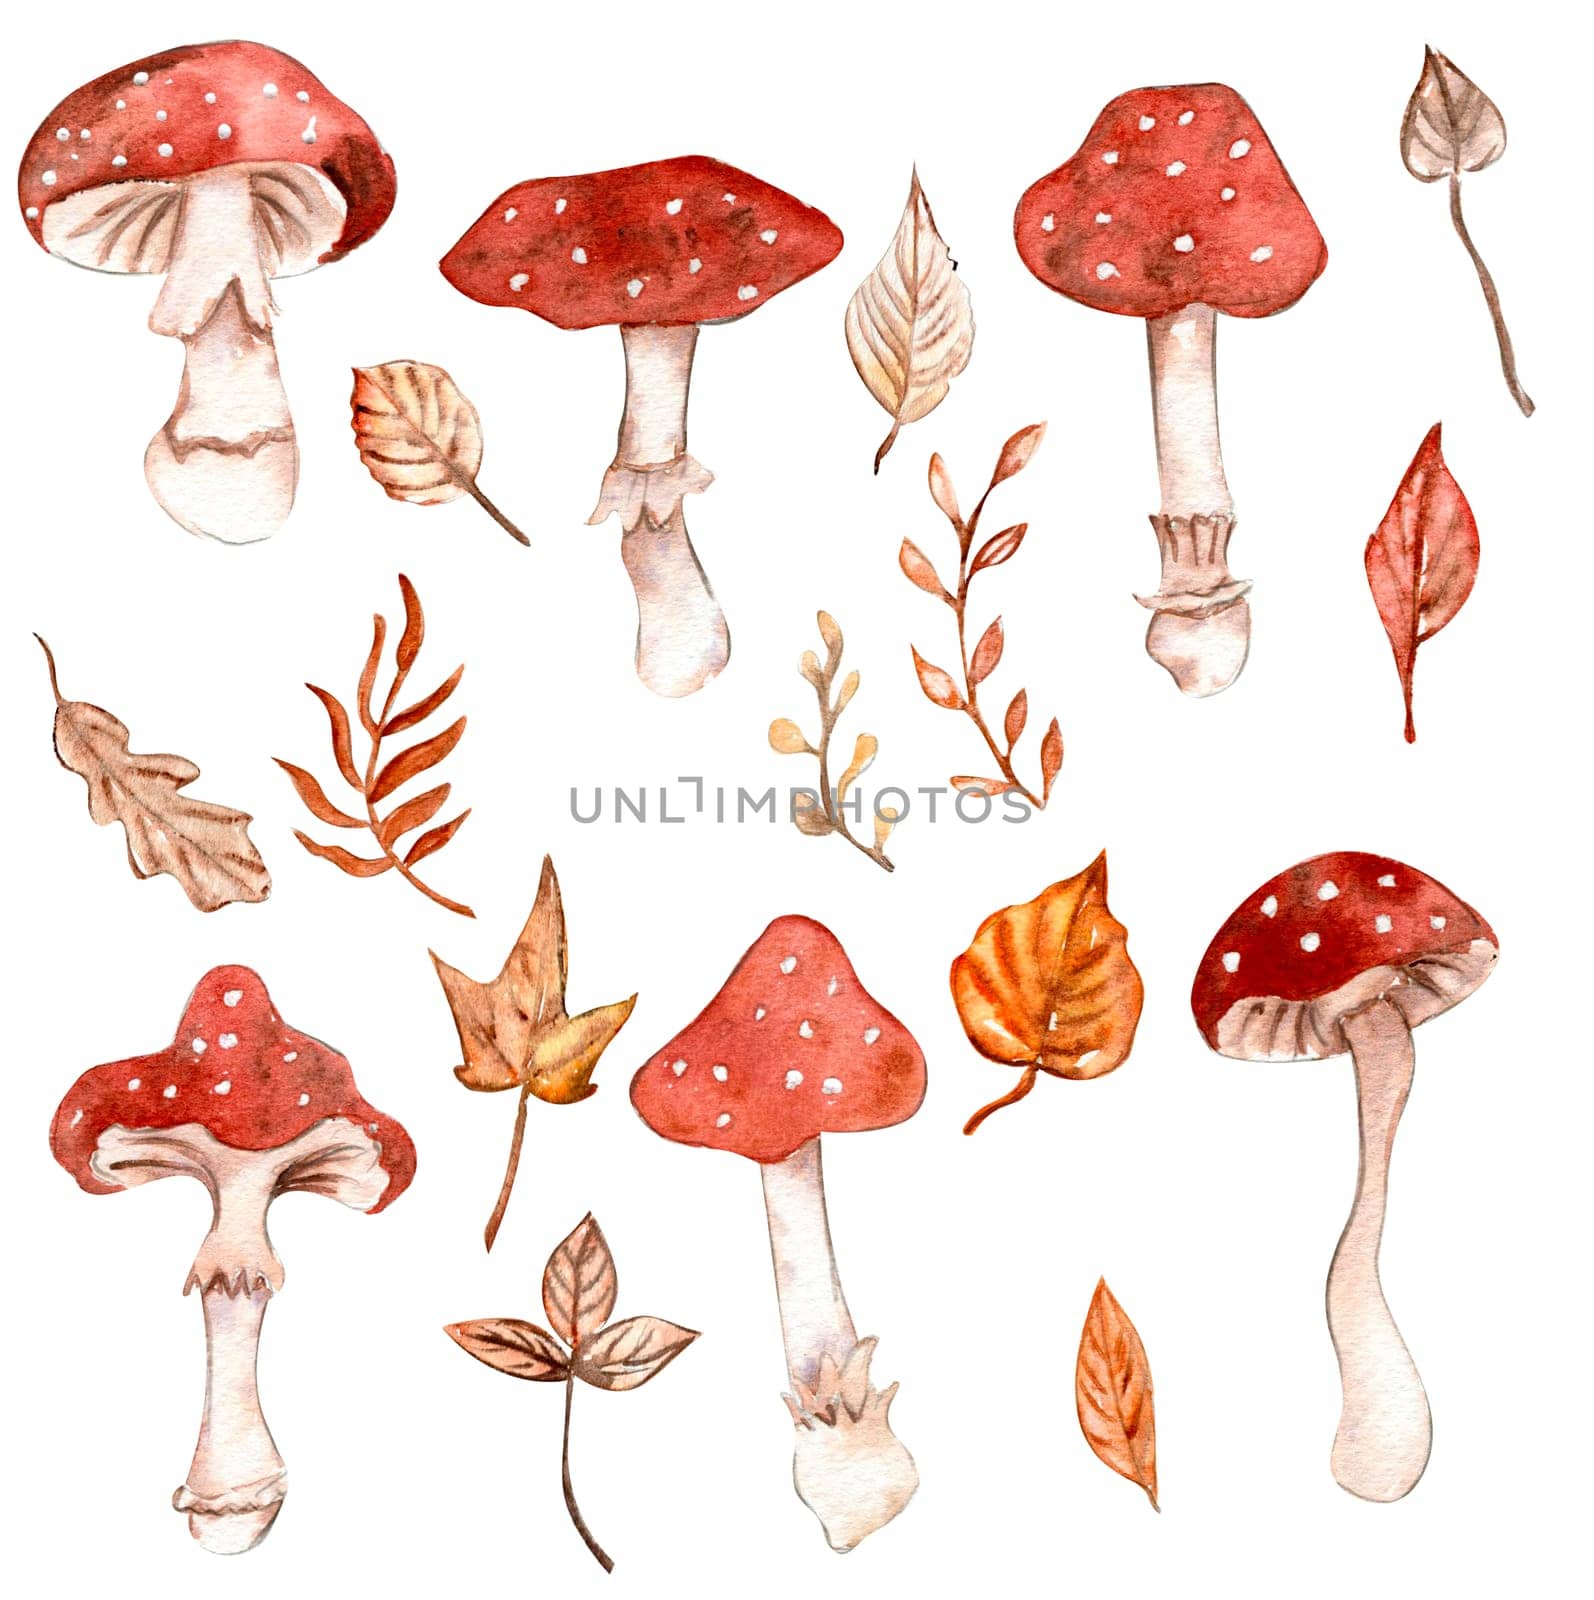 Watercolor hand drawn autumn leaves and mushrooms. Hand drawn illustration of autumn. Perfect for scrapbooking, kids design, wedding invitation, posters, greetings cards, party decoration.